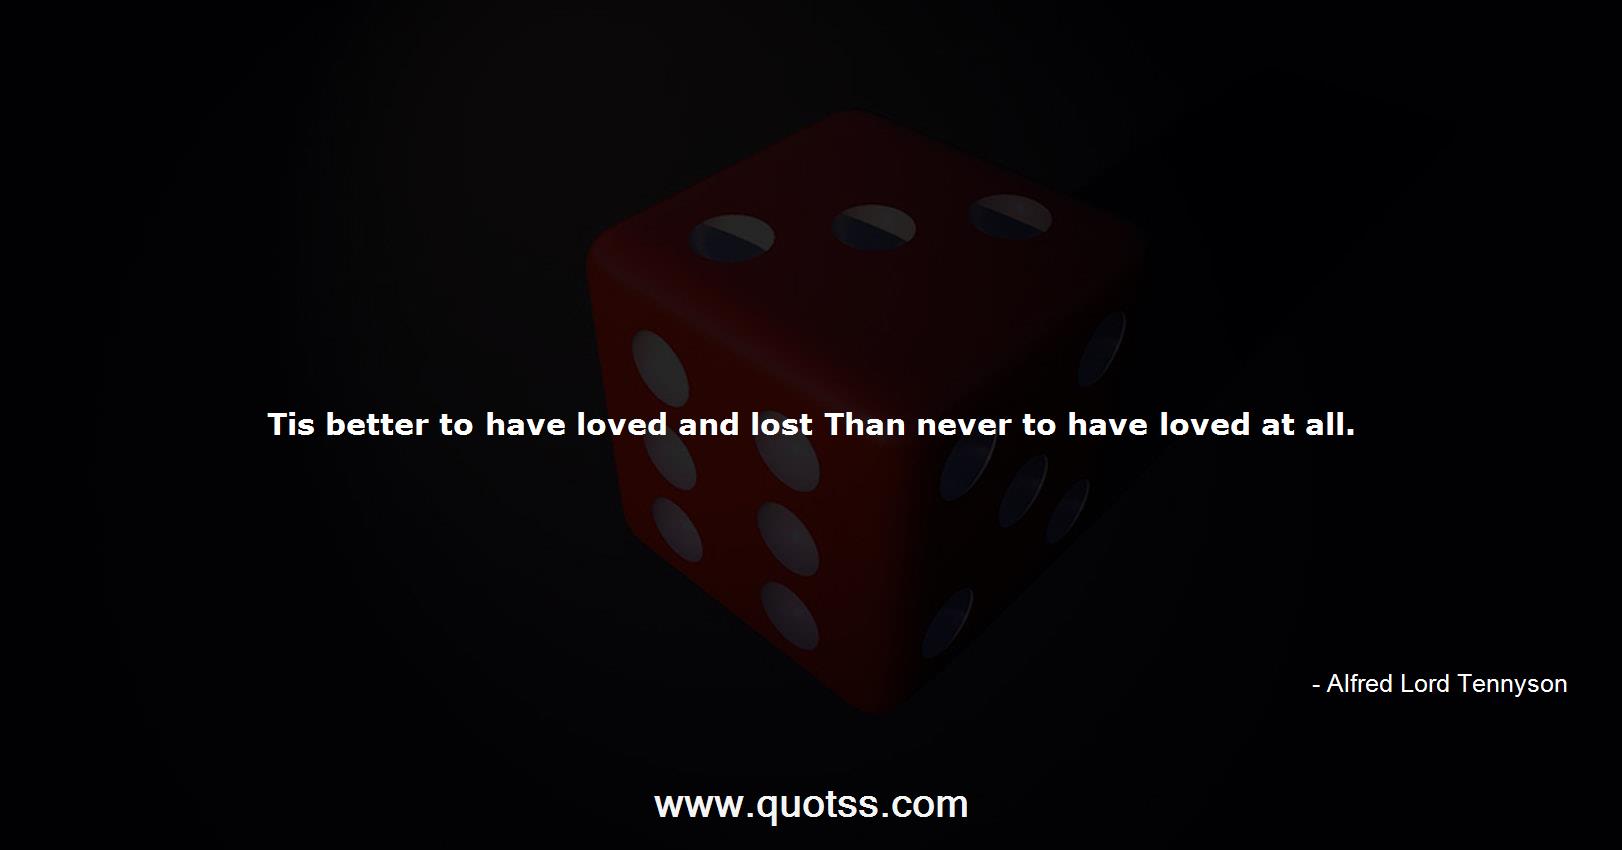 Alfred Lord Tennyson Quote on Quotss